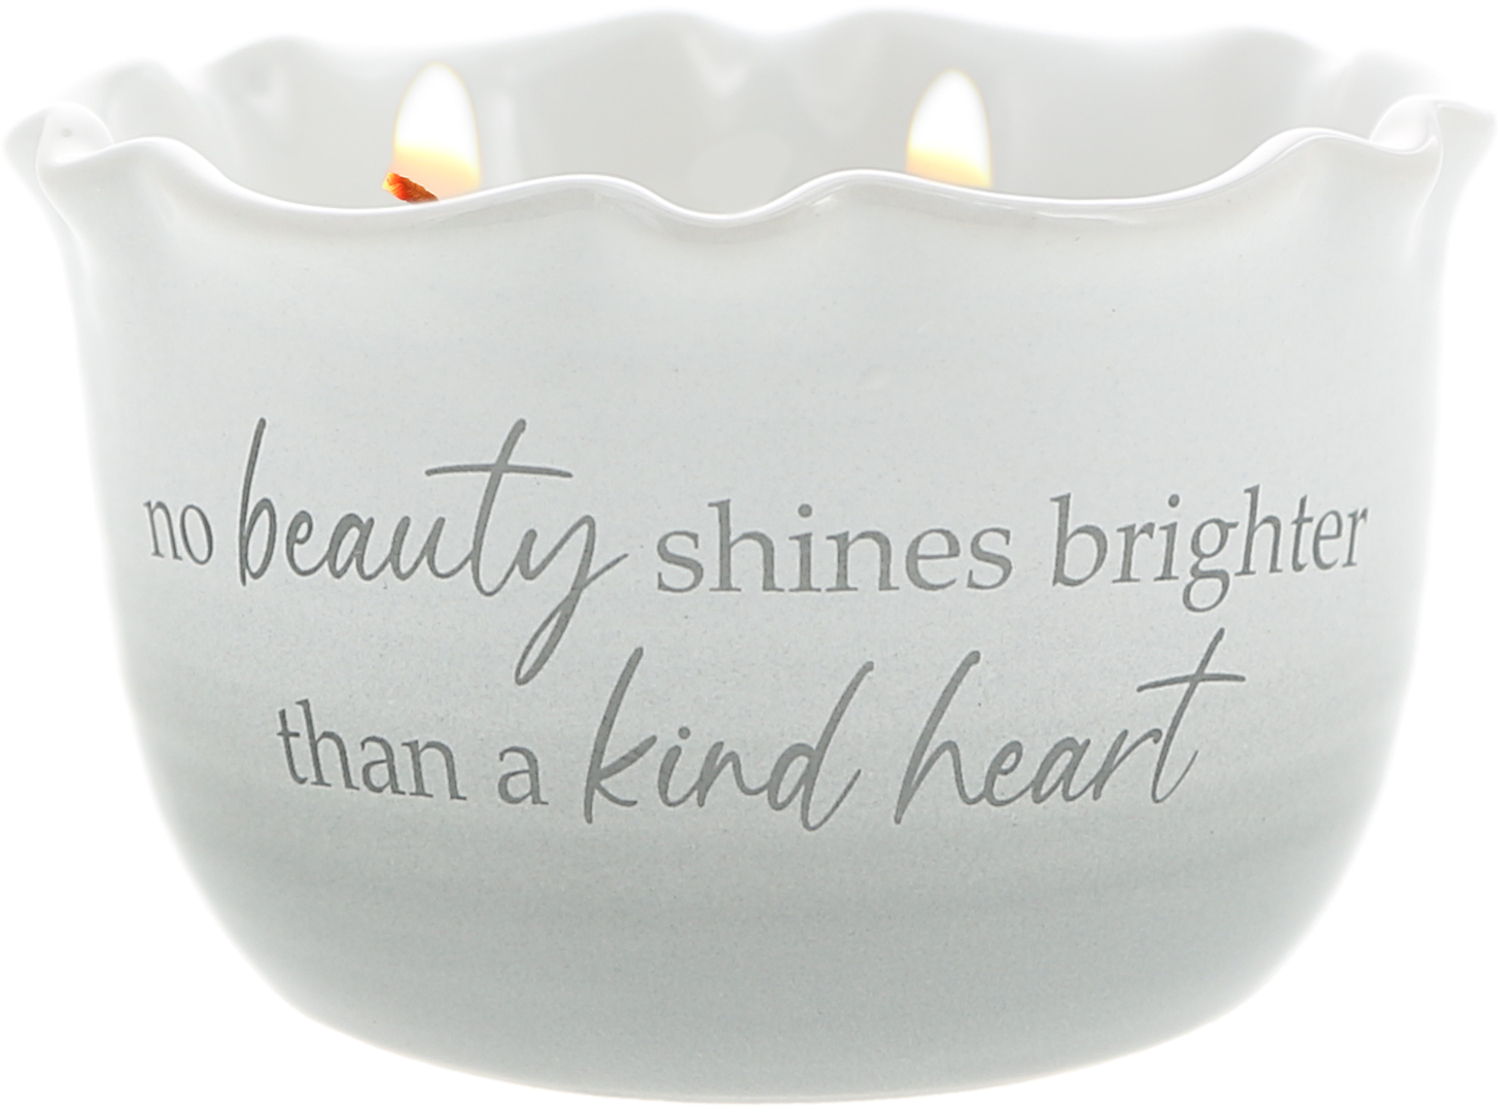 Kind Heart by Thoughts of Home - Kind Heart - 11 oz - 100% Soy Wax Reveal Candle
Scent: Tranquility